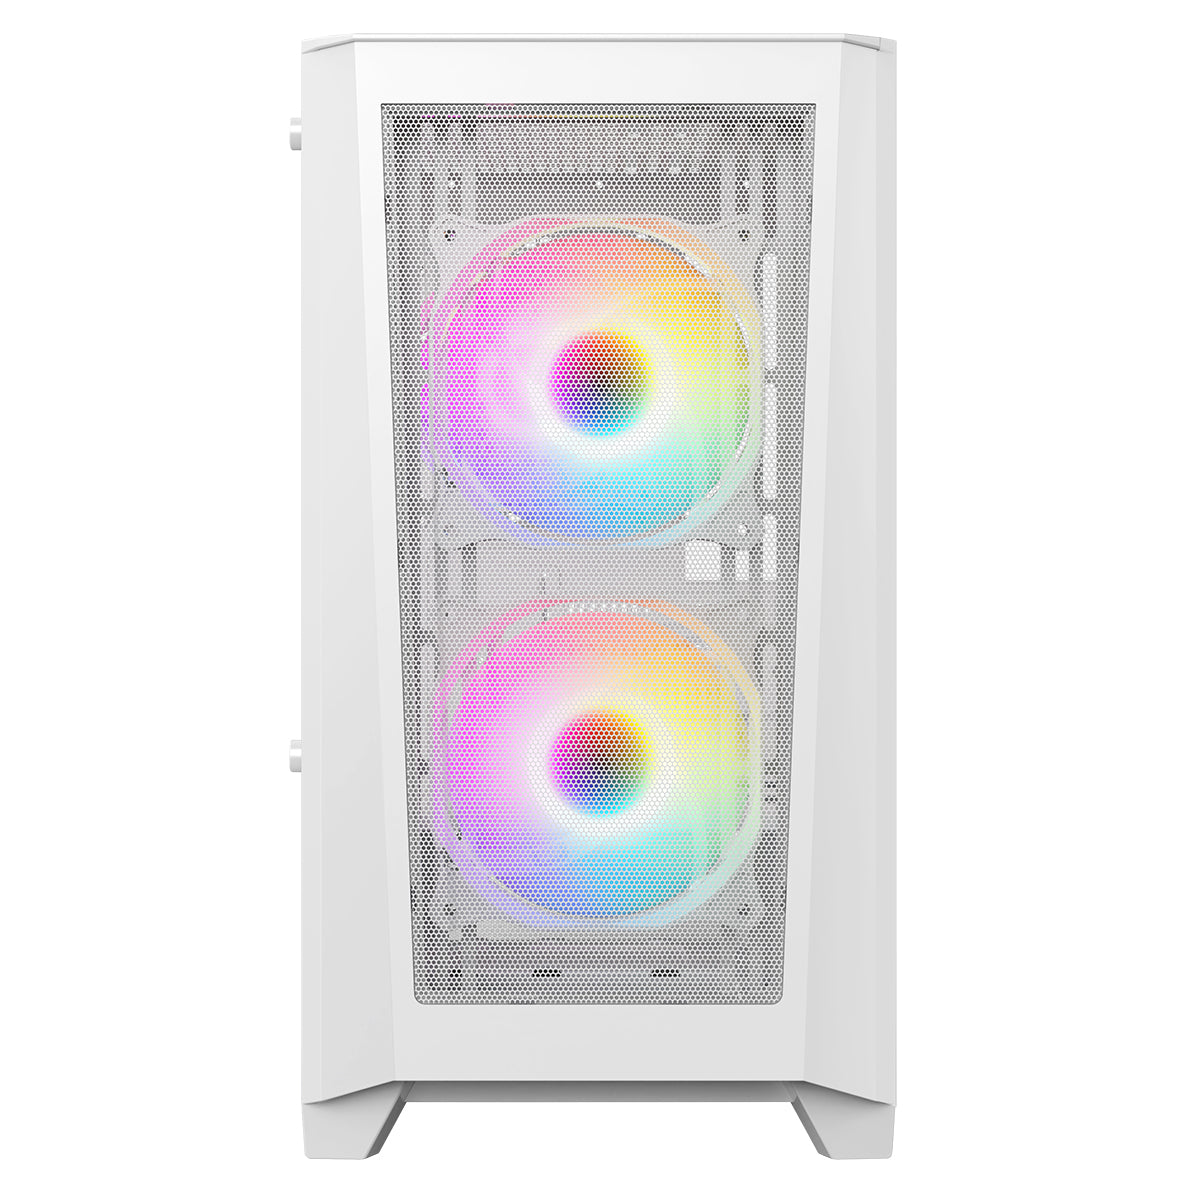 Level 2 White Micro-ATX Mesh PC Gaming Case with 3 x 120mm RGB Rainbow Fans Included With Tempered Glass Side Panel